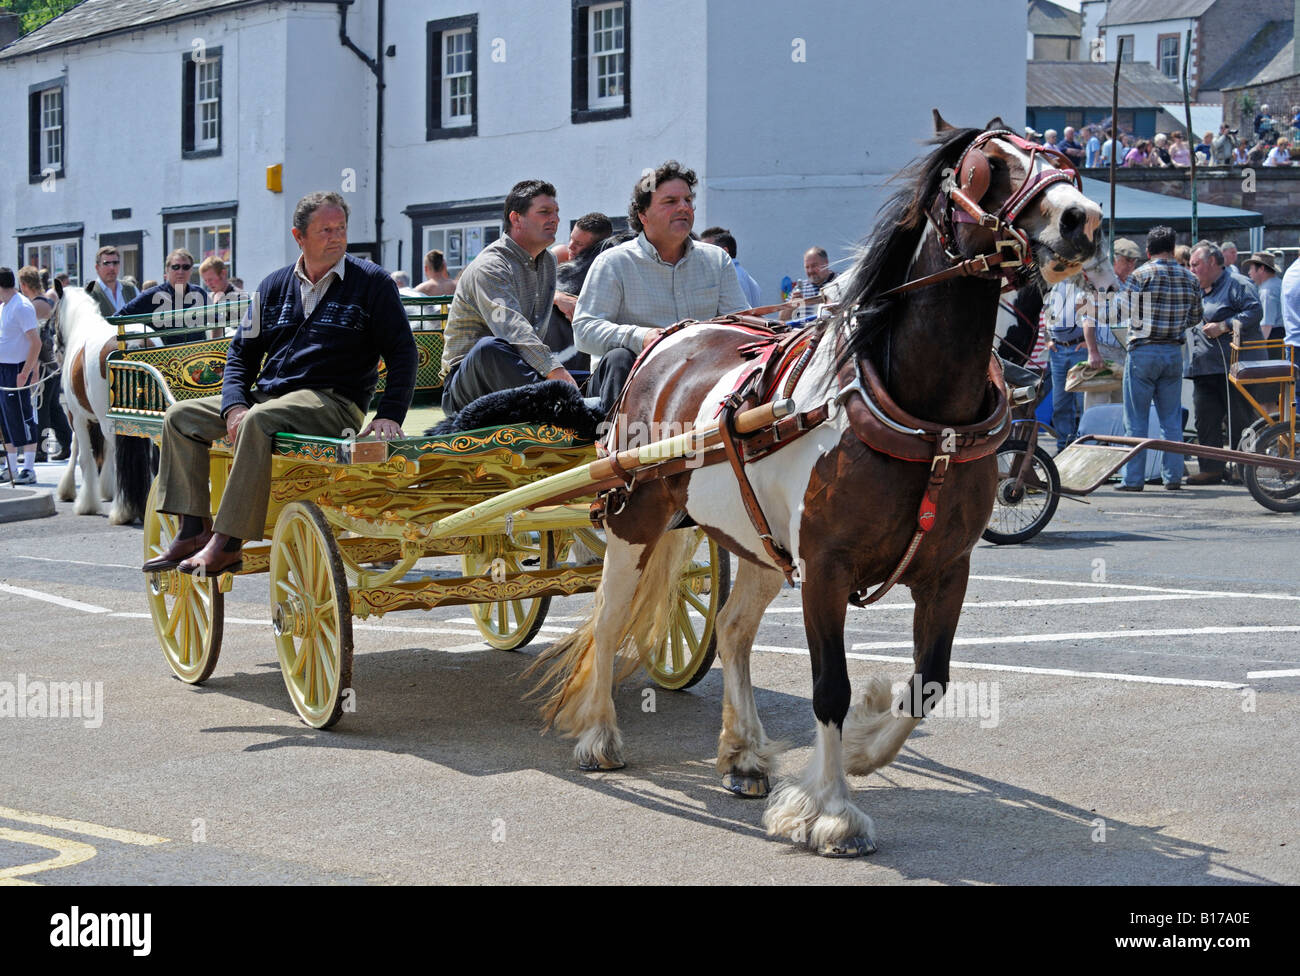 Gypsy travellers with trotting horse and cart. Appleby Horse Fair. Appleby-in-Westmorland, Cumbria, England, United Kingdom. Stock Photo